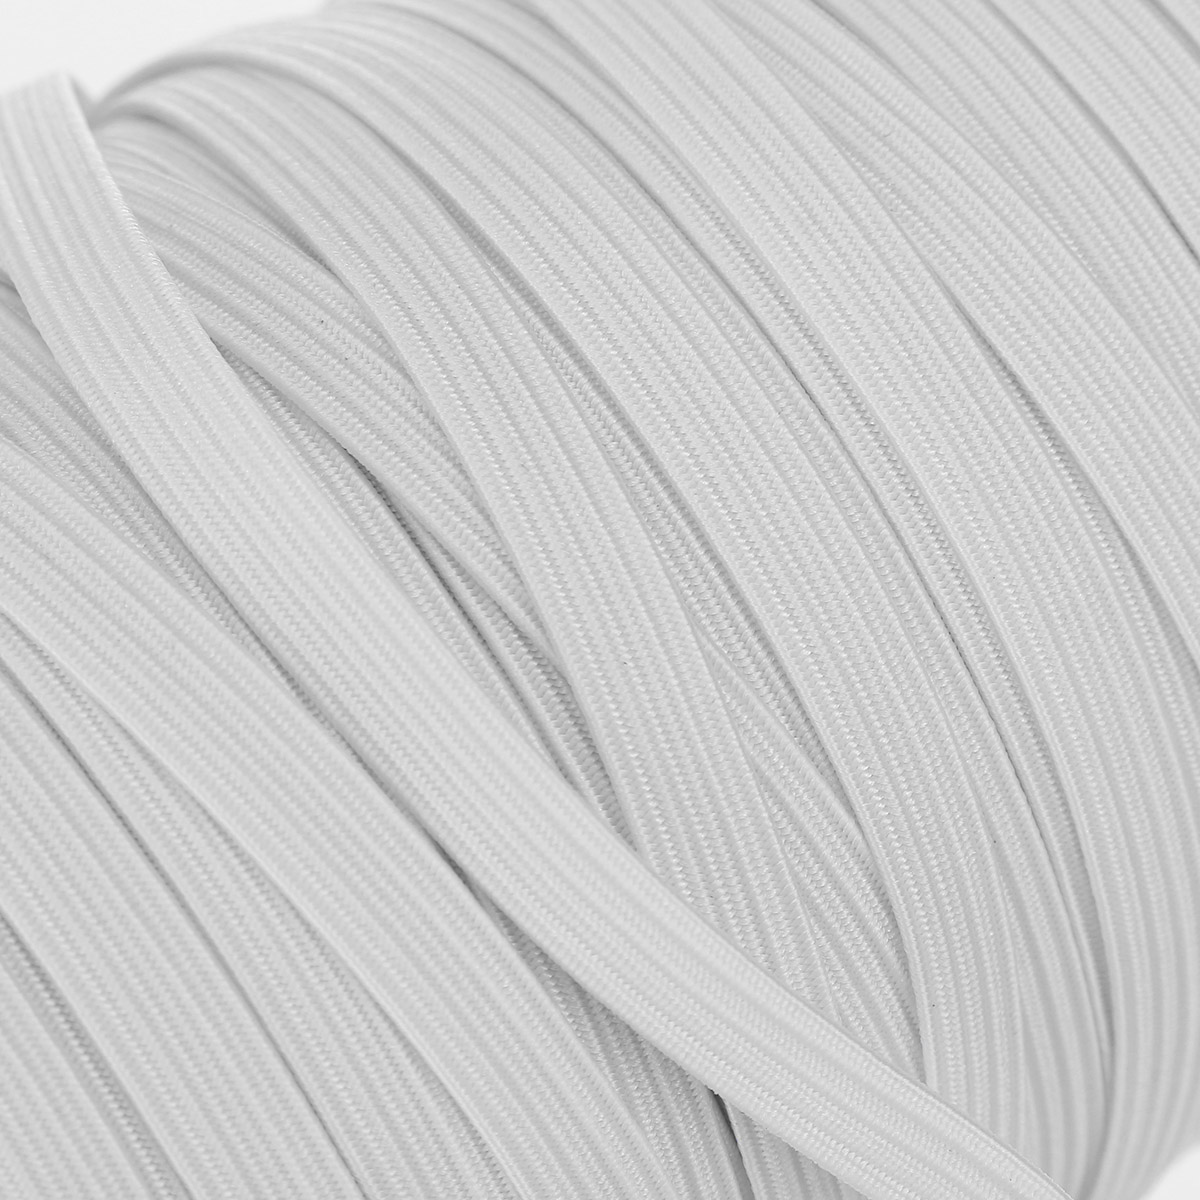 Find 100 yards Braided Elastic Band 1/4 Trim/Spandex/Mask String for Mask/DIY Crafts for Sale on Gipsybee.com with cryptocurrencies